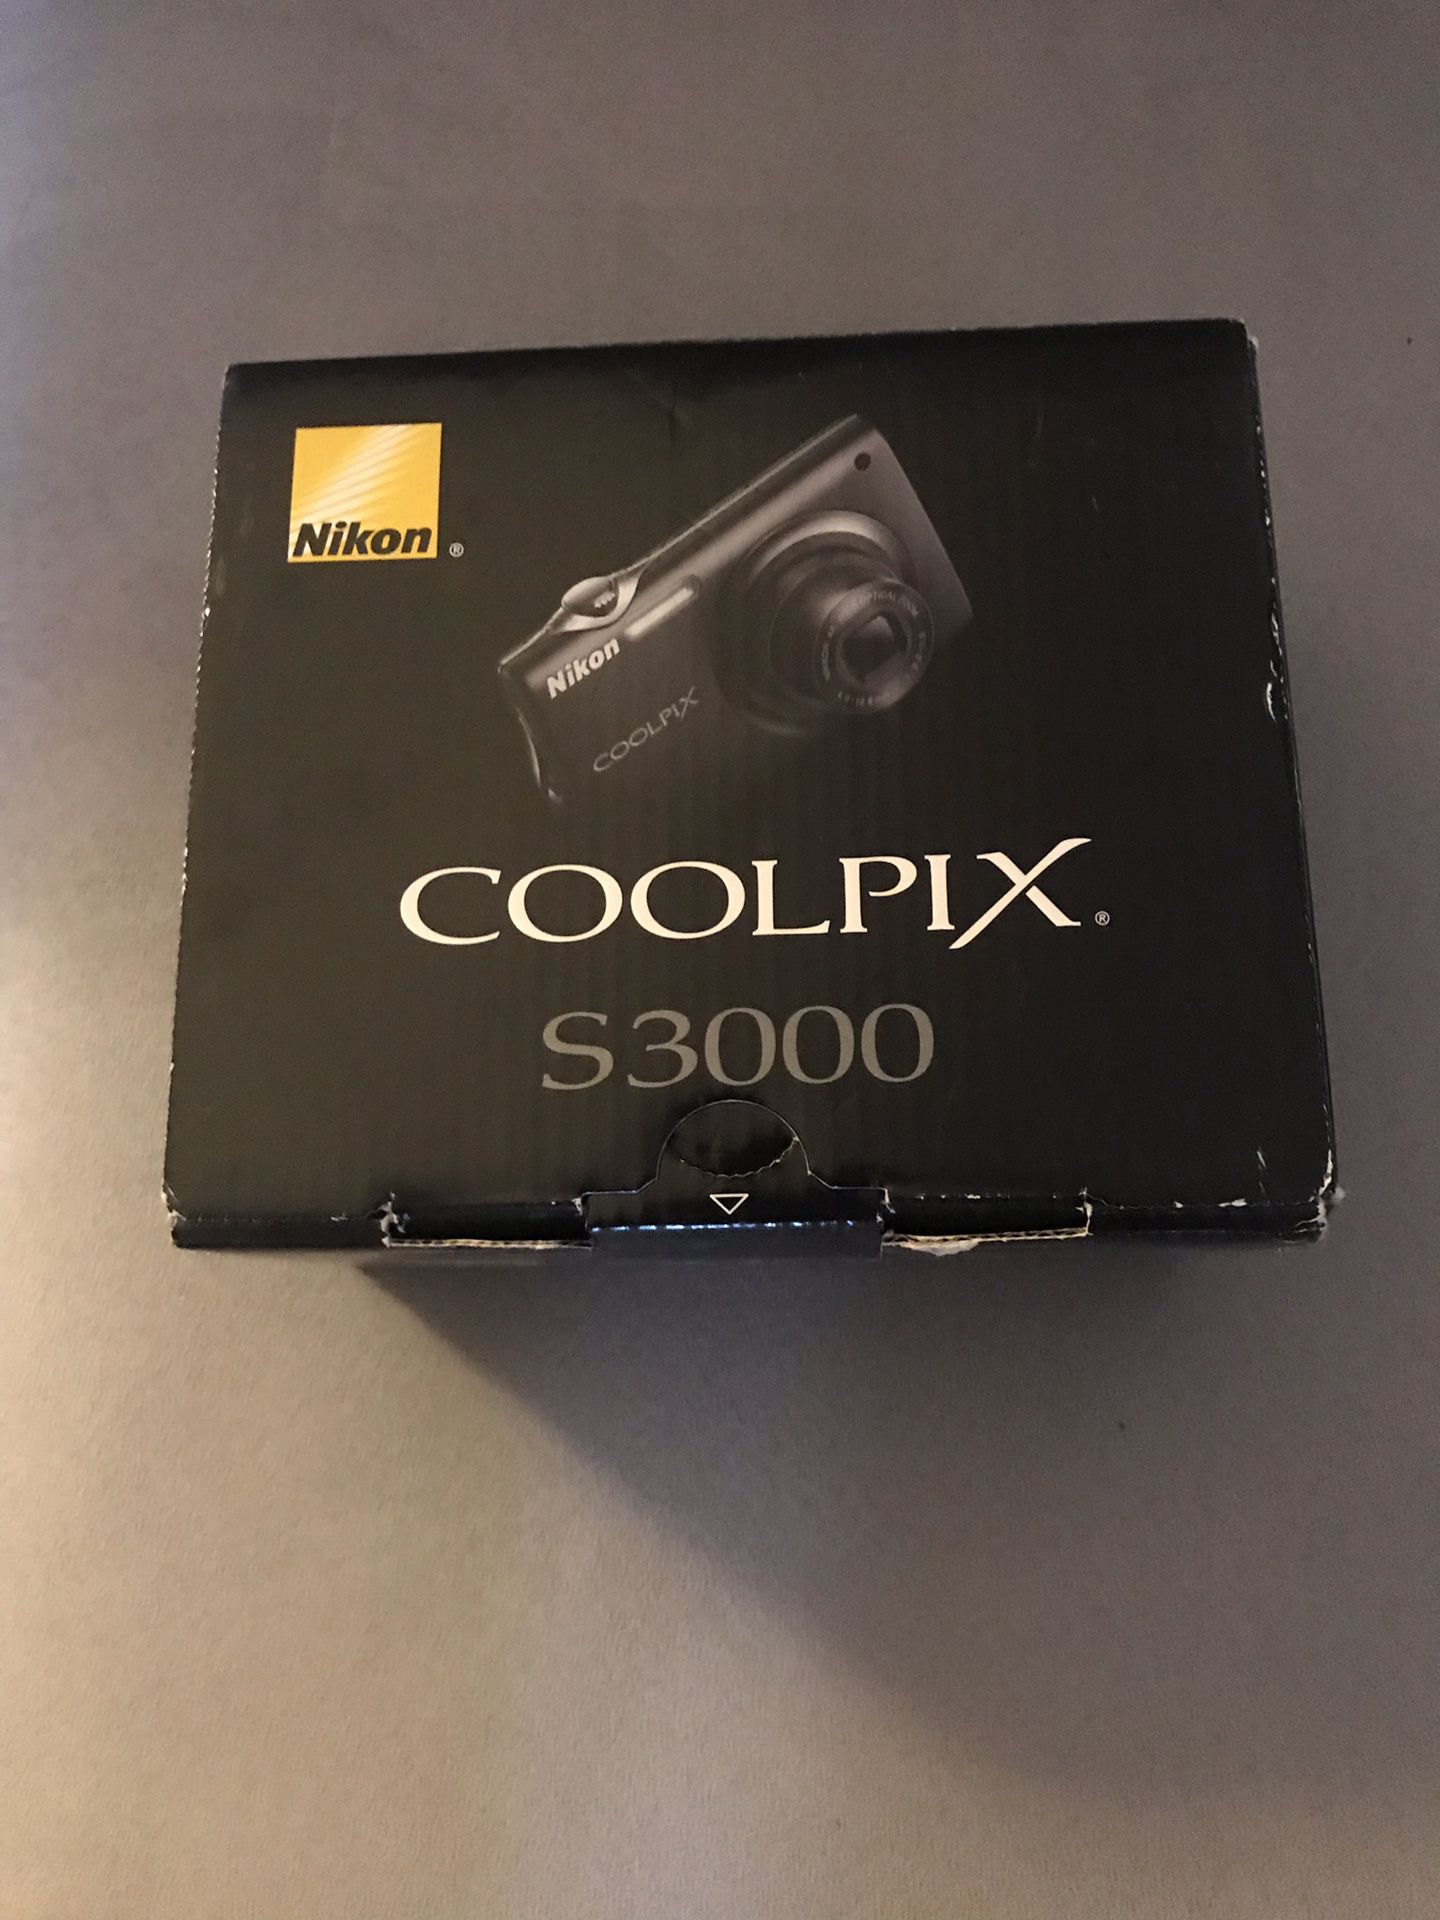 Nikon s3000 Coolpix digital camera with SD cards included